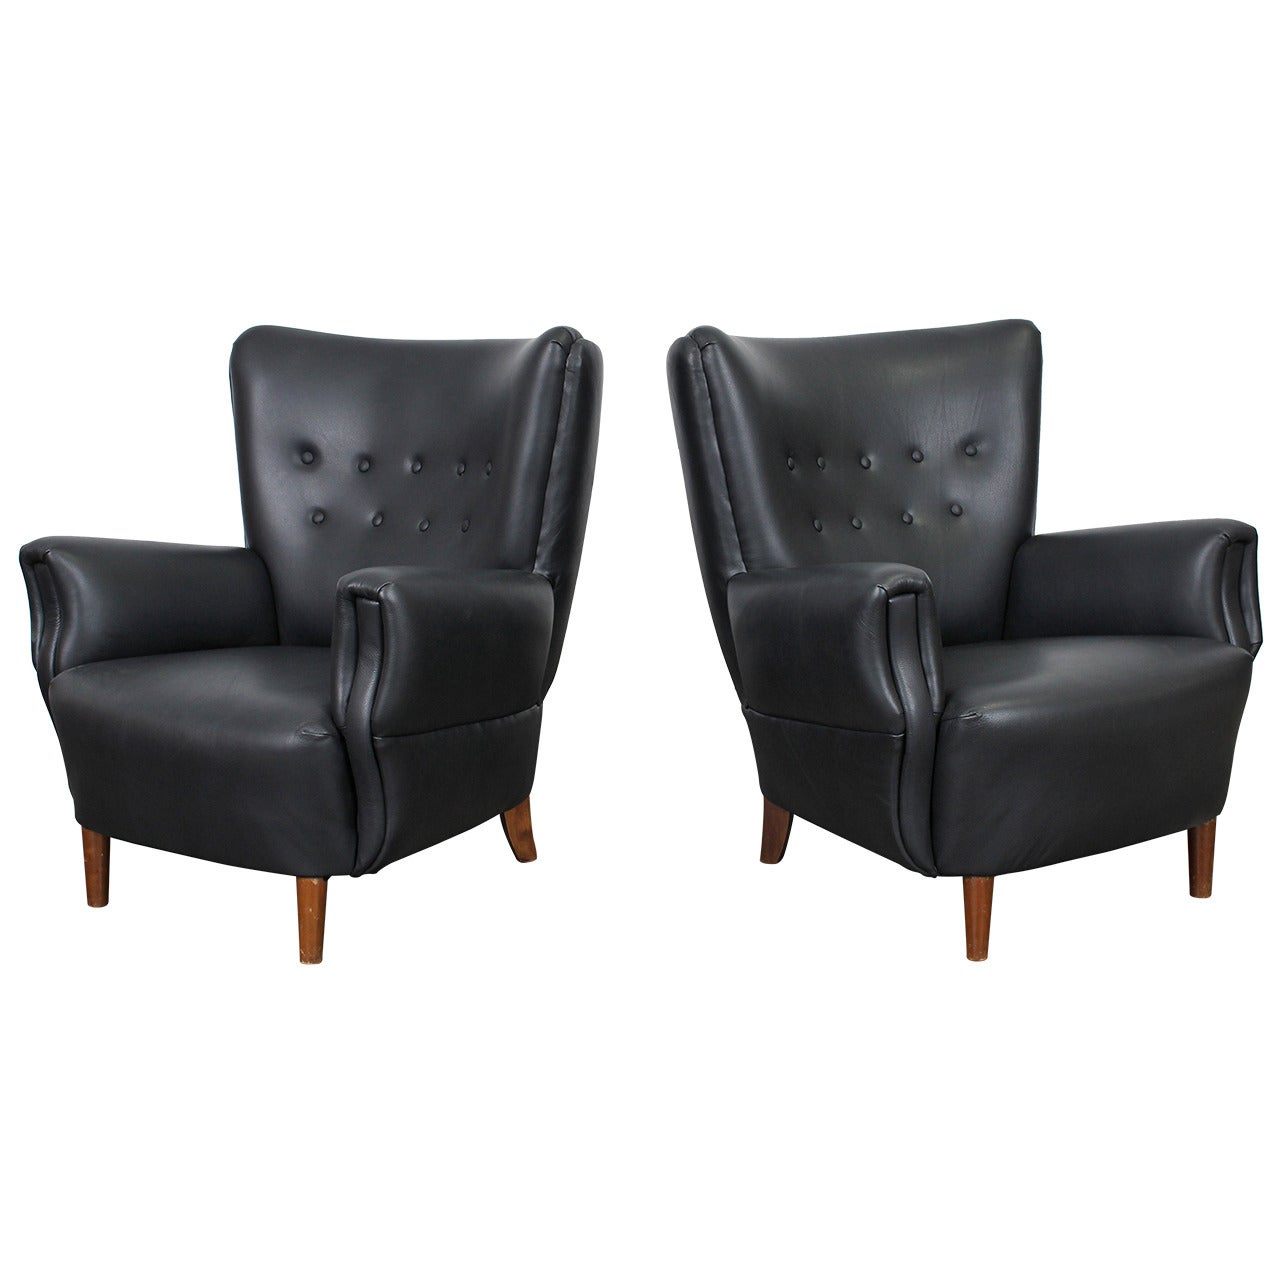 Pair of Black Leather Tufted Danish 1950s Lounge Chairs